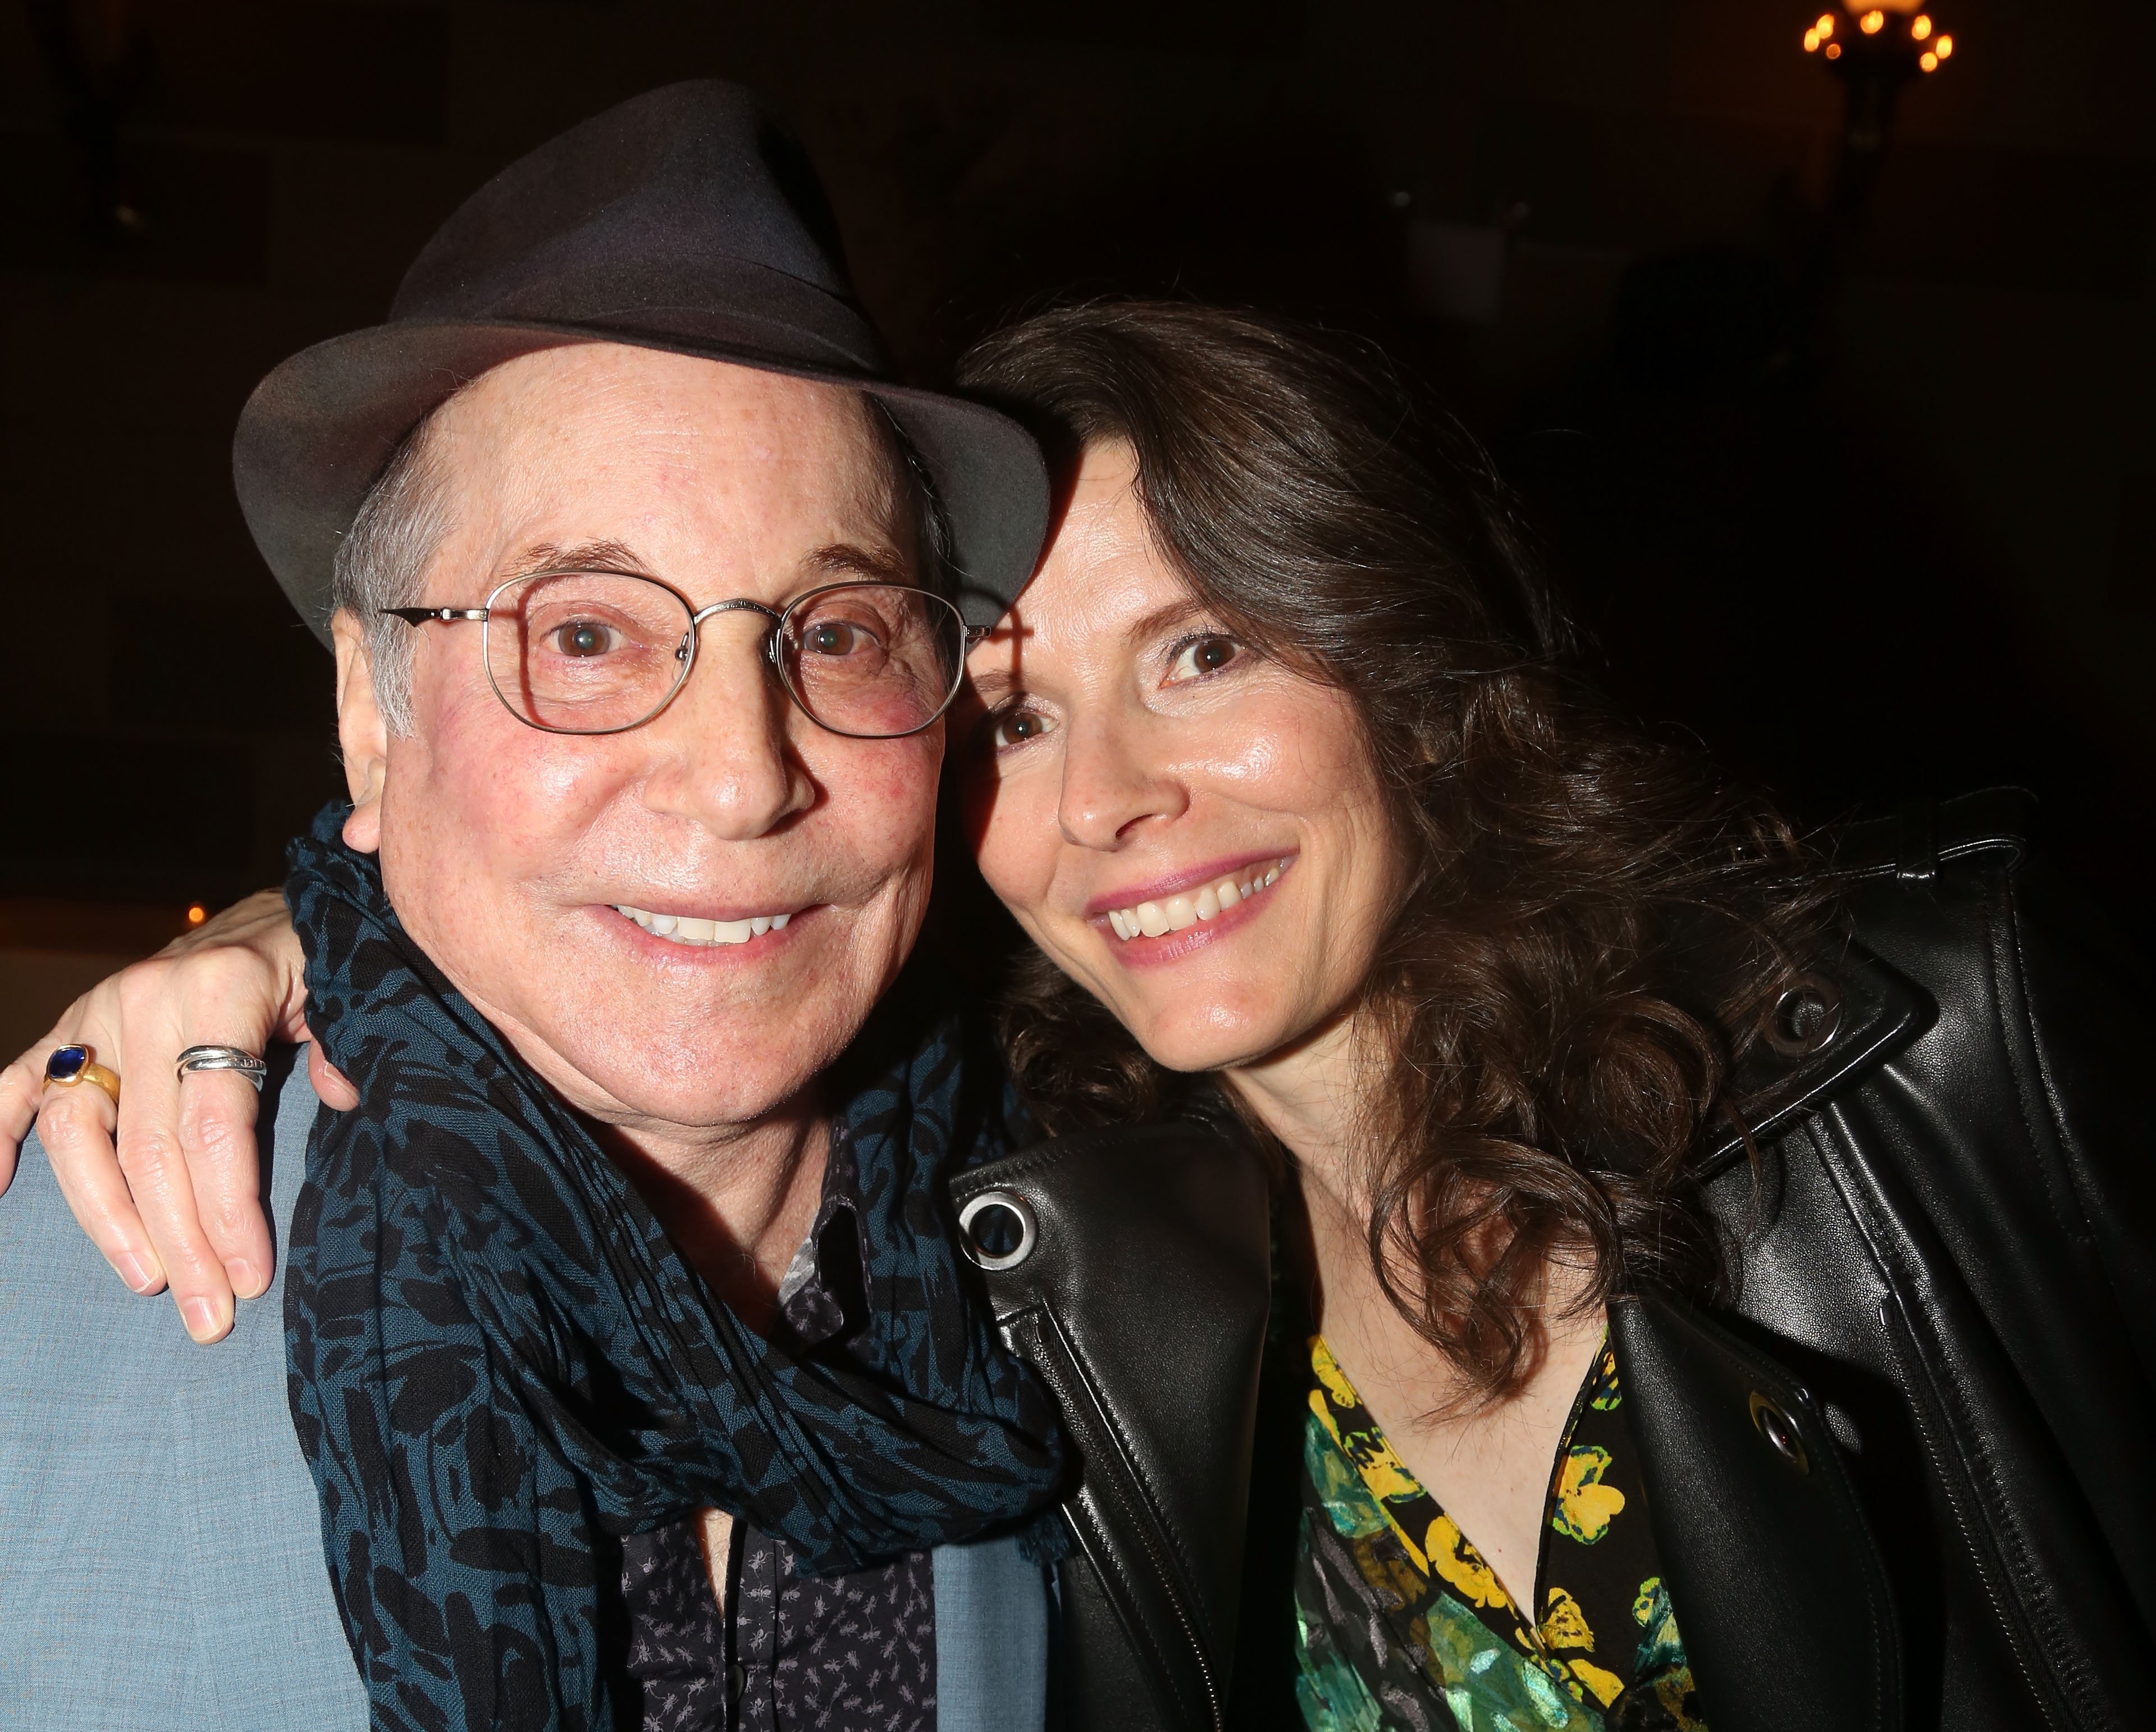 Paul Simon and Edie Brickell at the Opening Night of "Bright Star," at Gotham Hall on March 24, 2016 in New York City. | Source: Getty Images